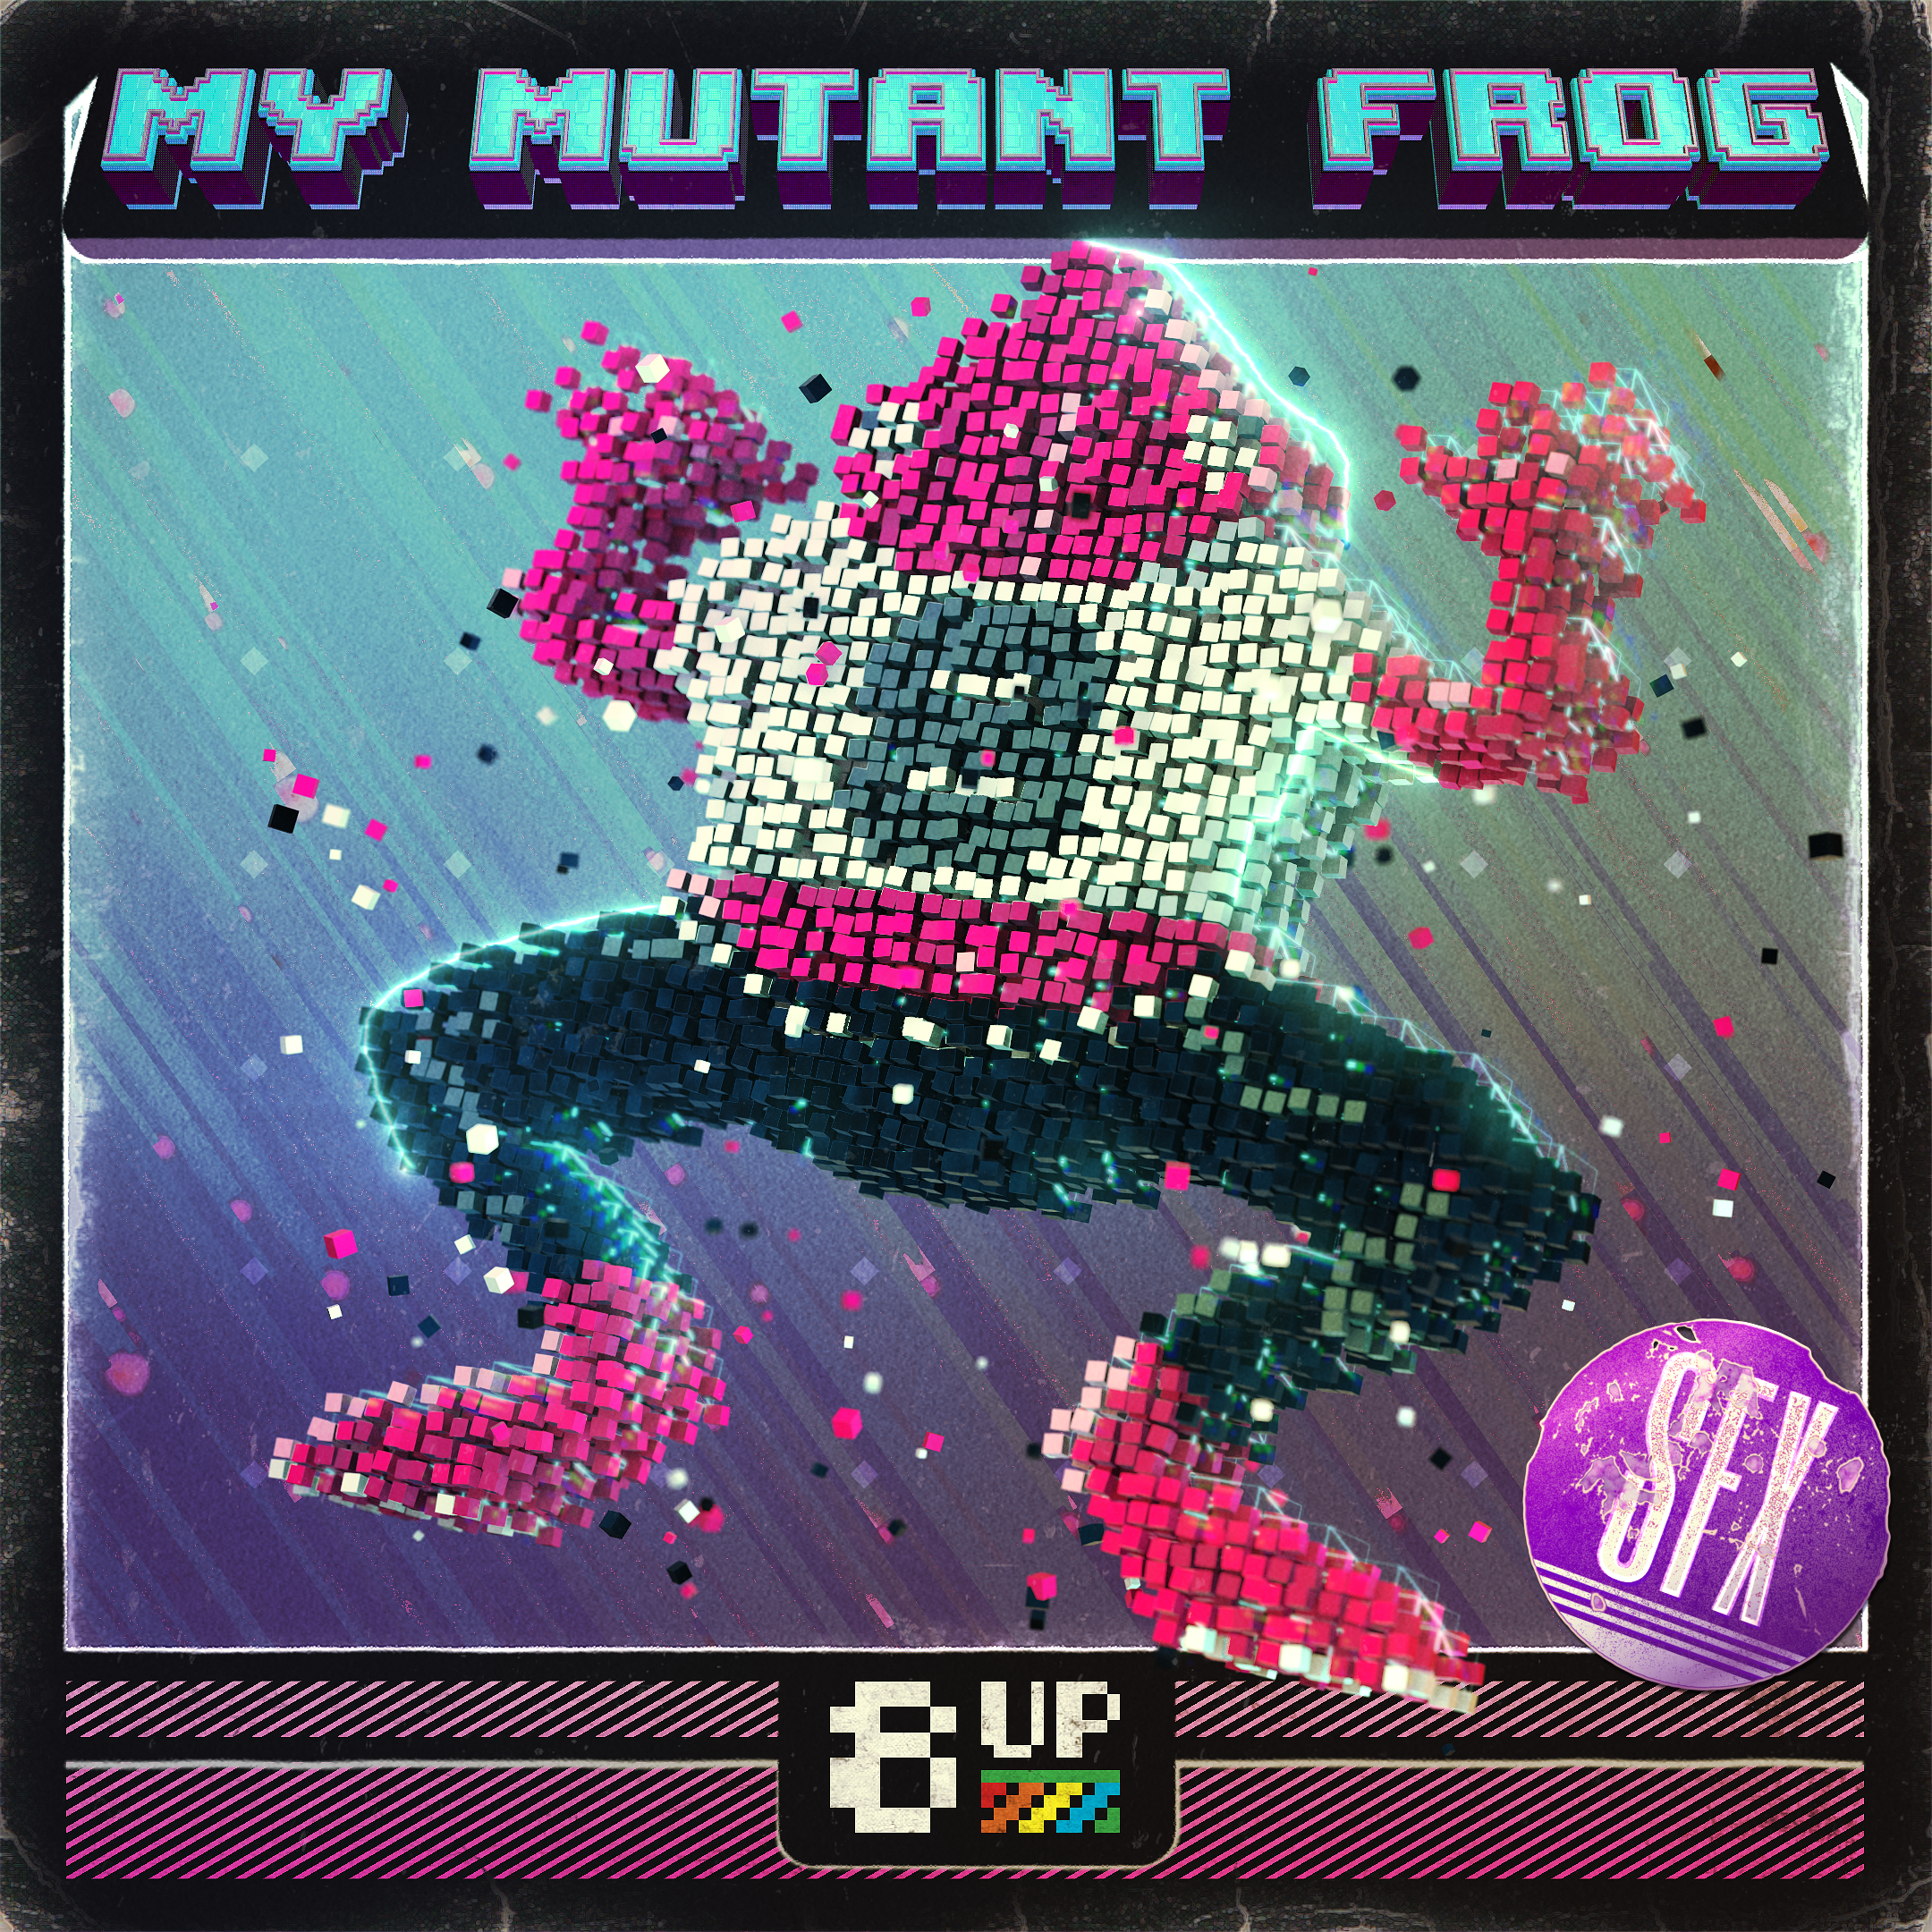 My Mutant Frog Sound Effects Packshot by 8UP